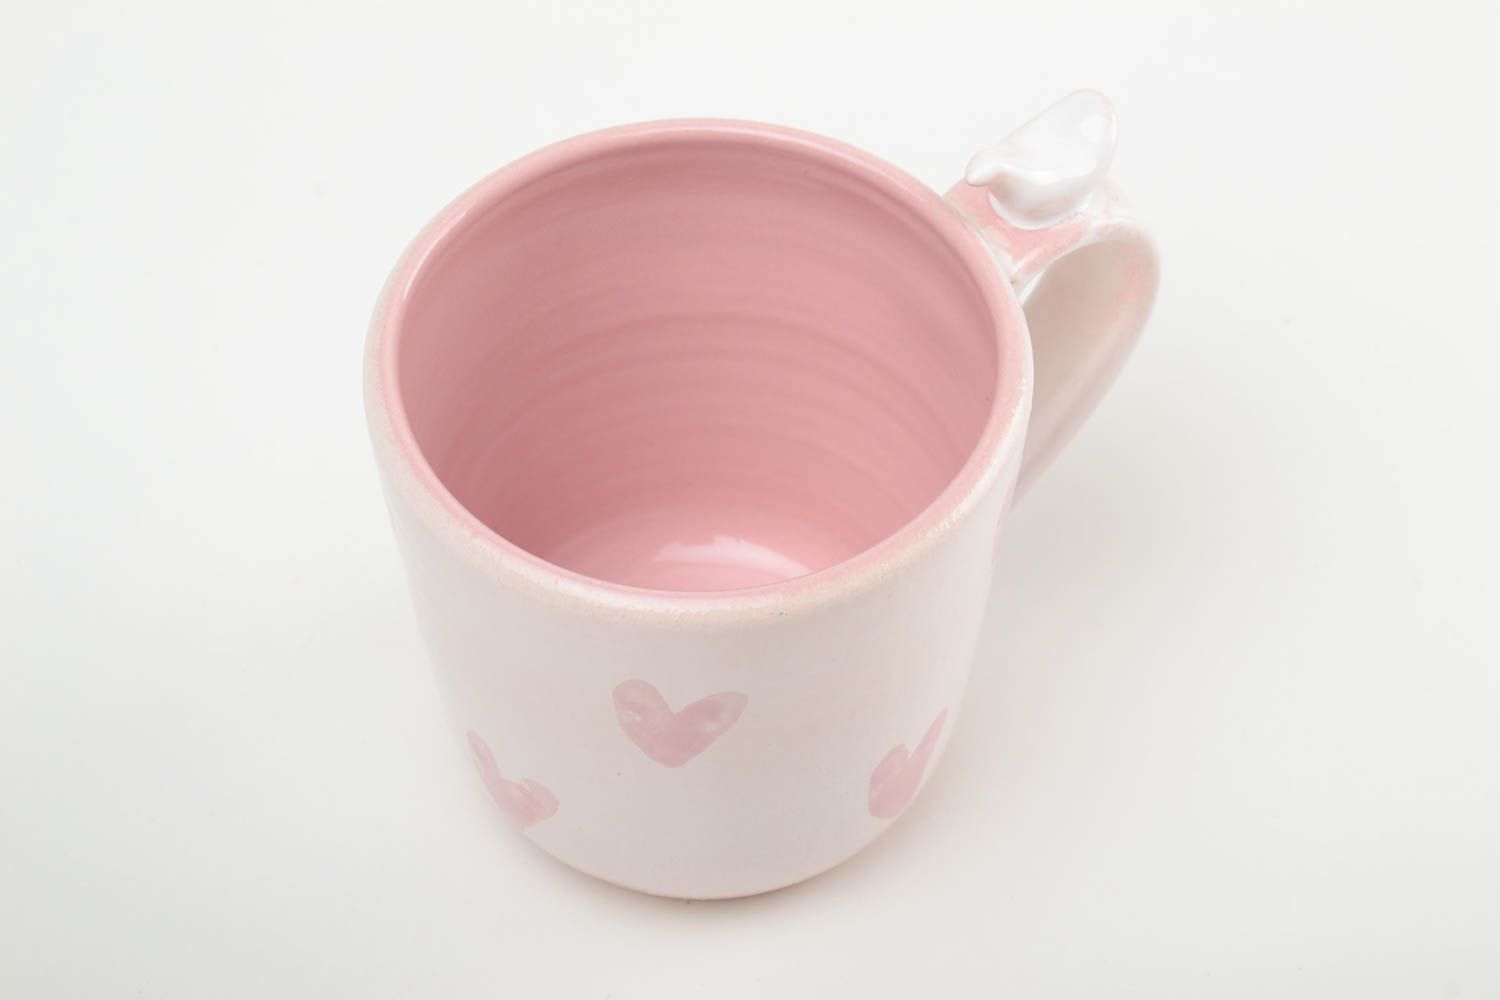 10 oz pink glaze ceramic cup with hearts pattern and bird on the handle photo 2